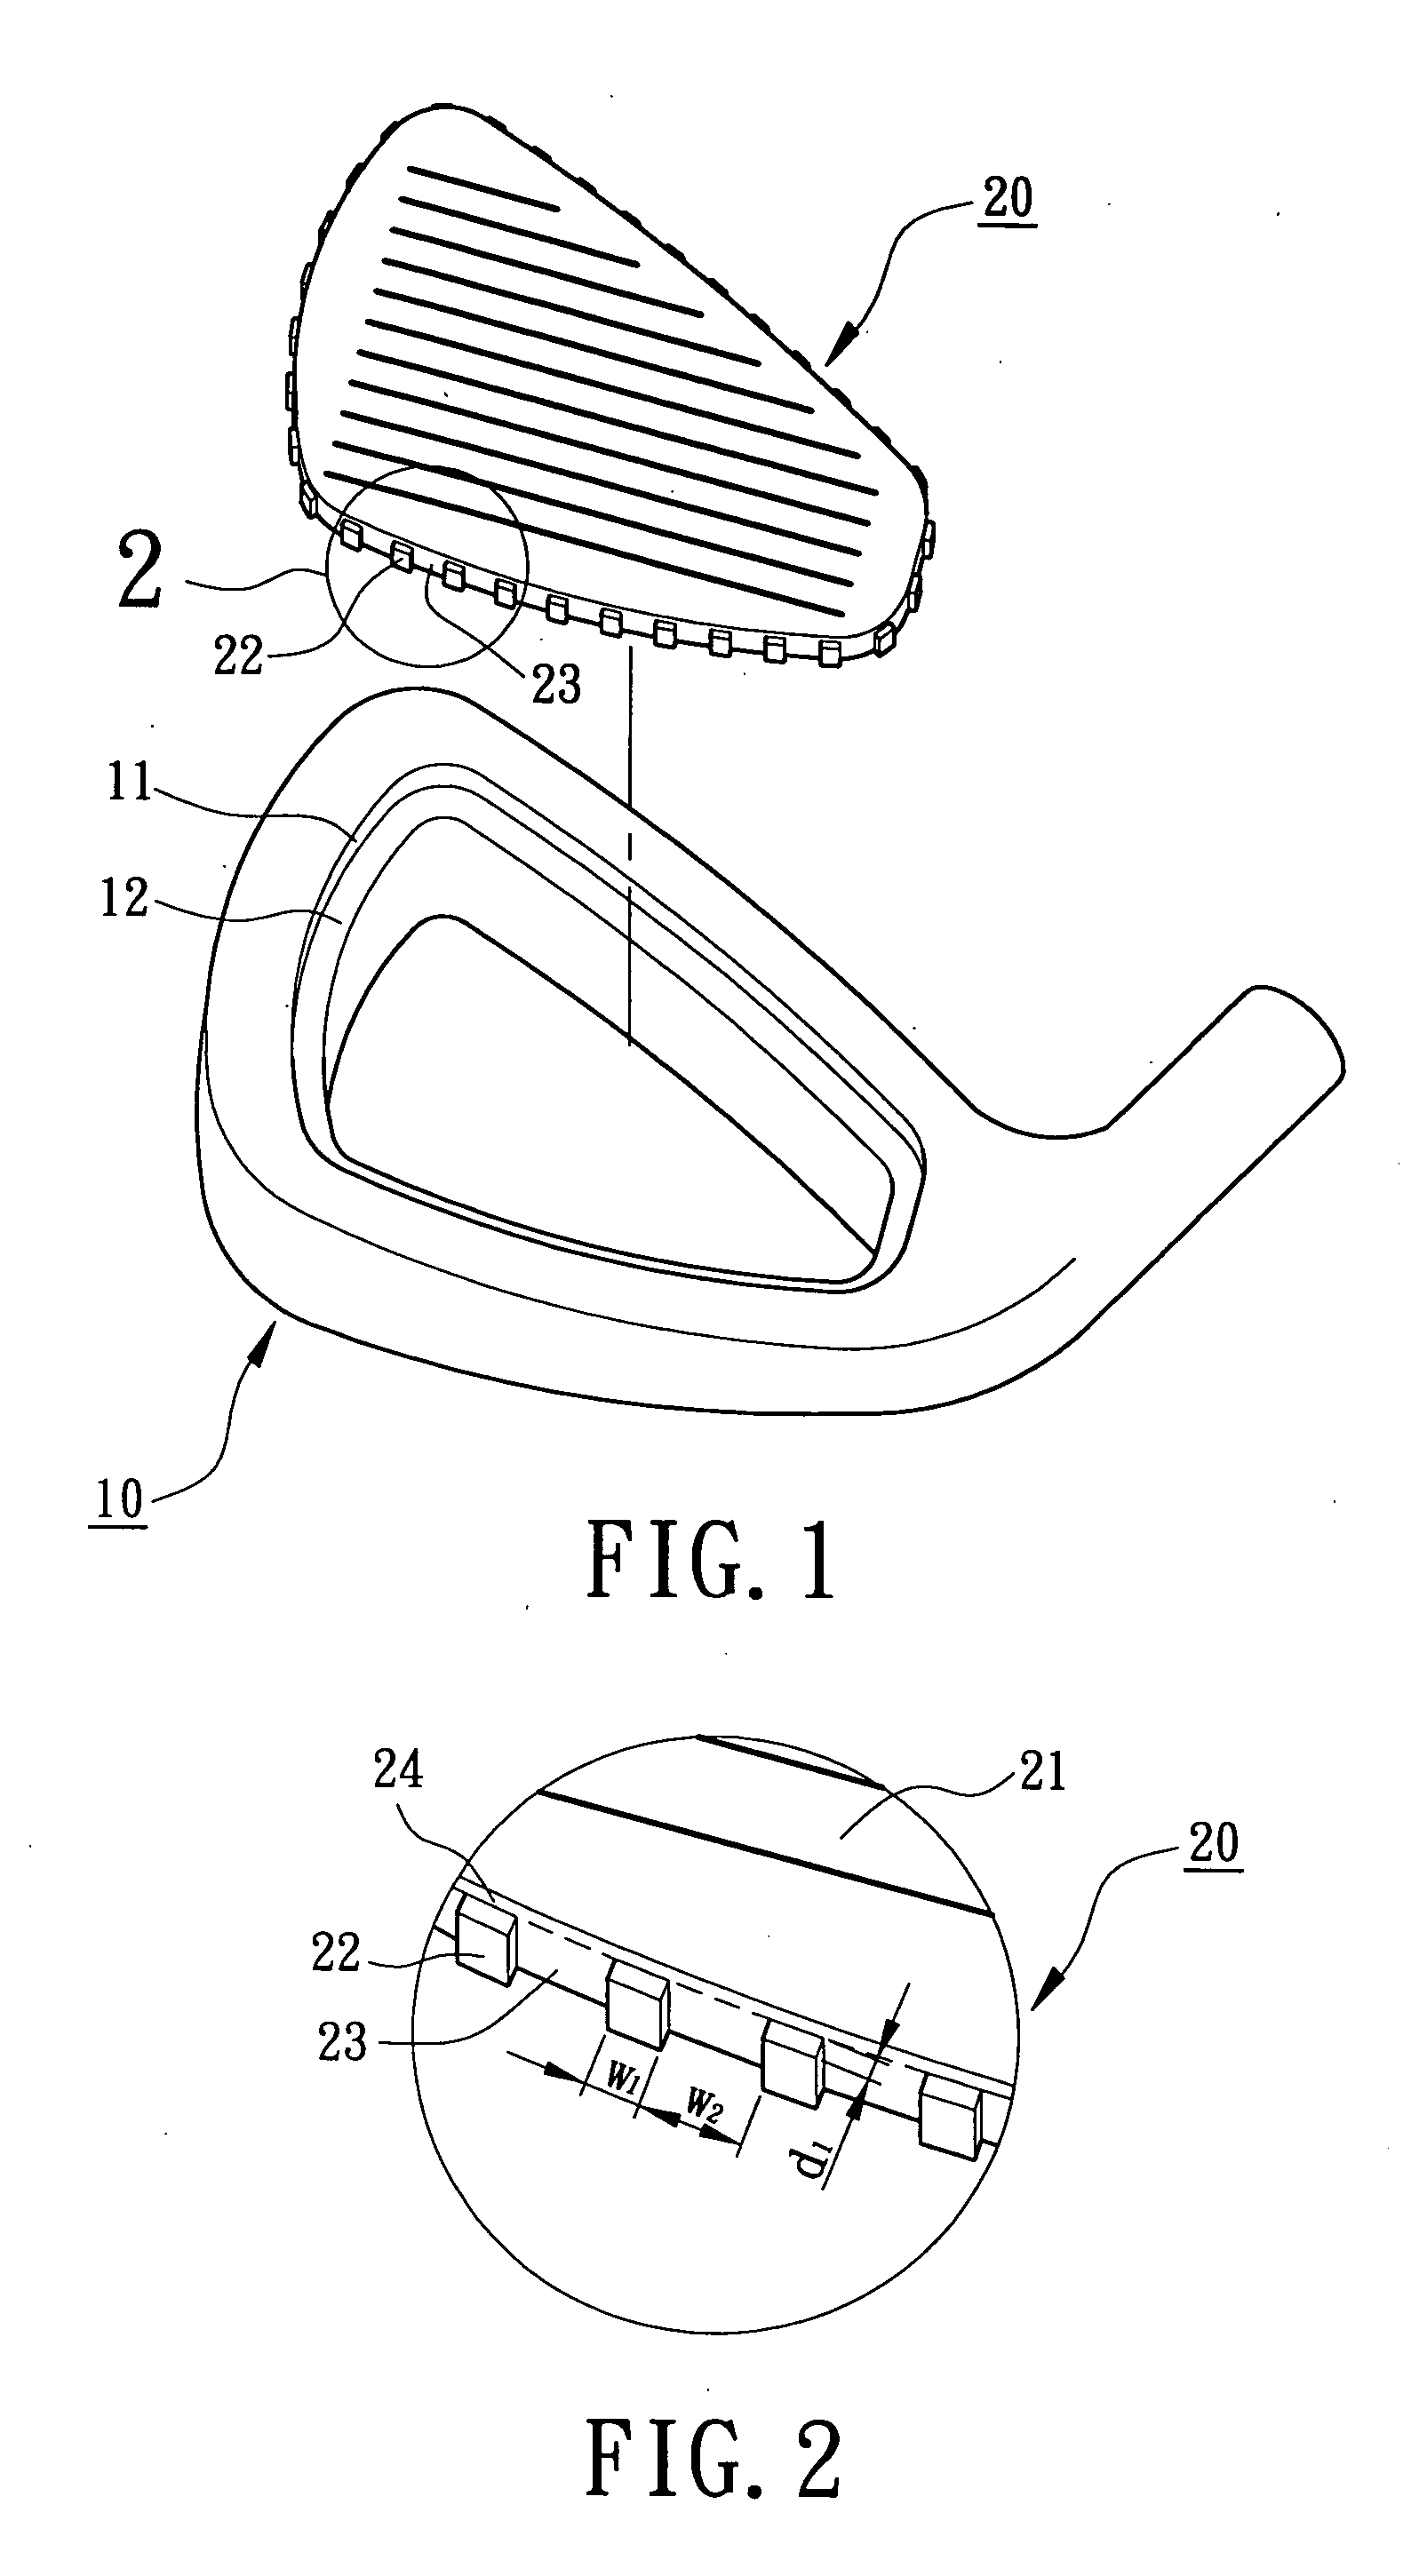 Connecting structure for a striking plate of a golf club head